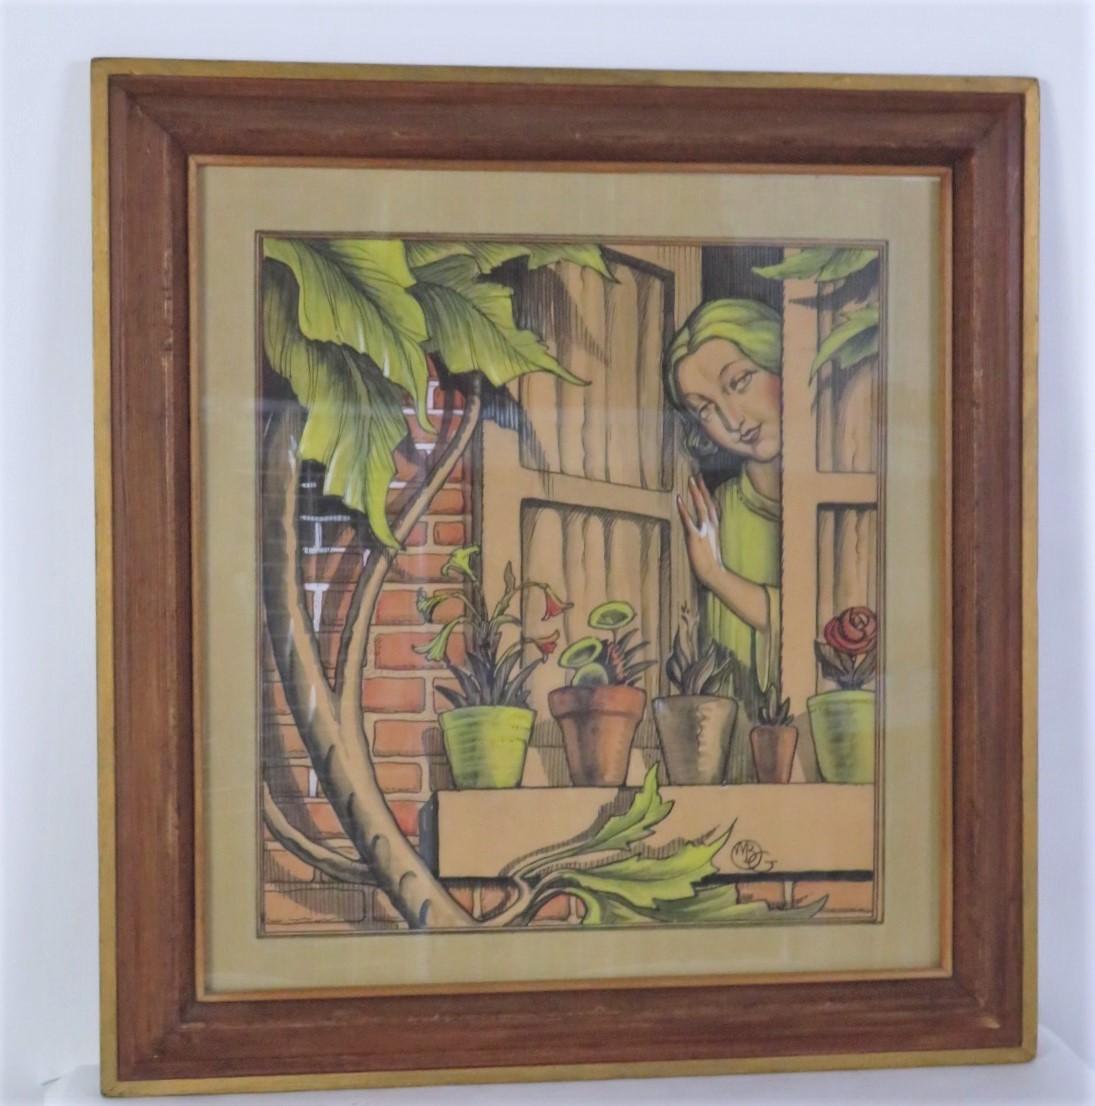 Dramatic and lovely watercolor happy depiction of a period 1920s lady at an open window looking out at the follage and potted plants. Realized by William Bradford Green, a noted American artist (1871-1945), it is a realistic portrayal in pen and